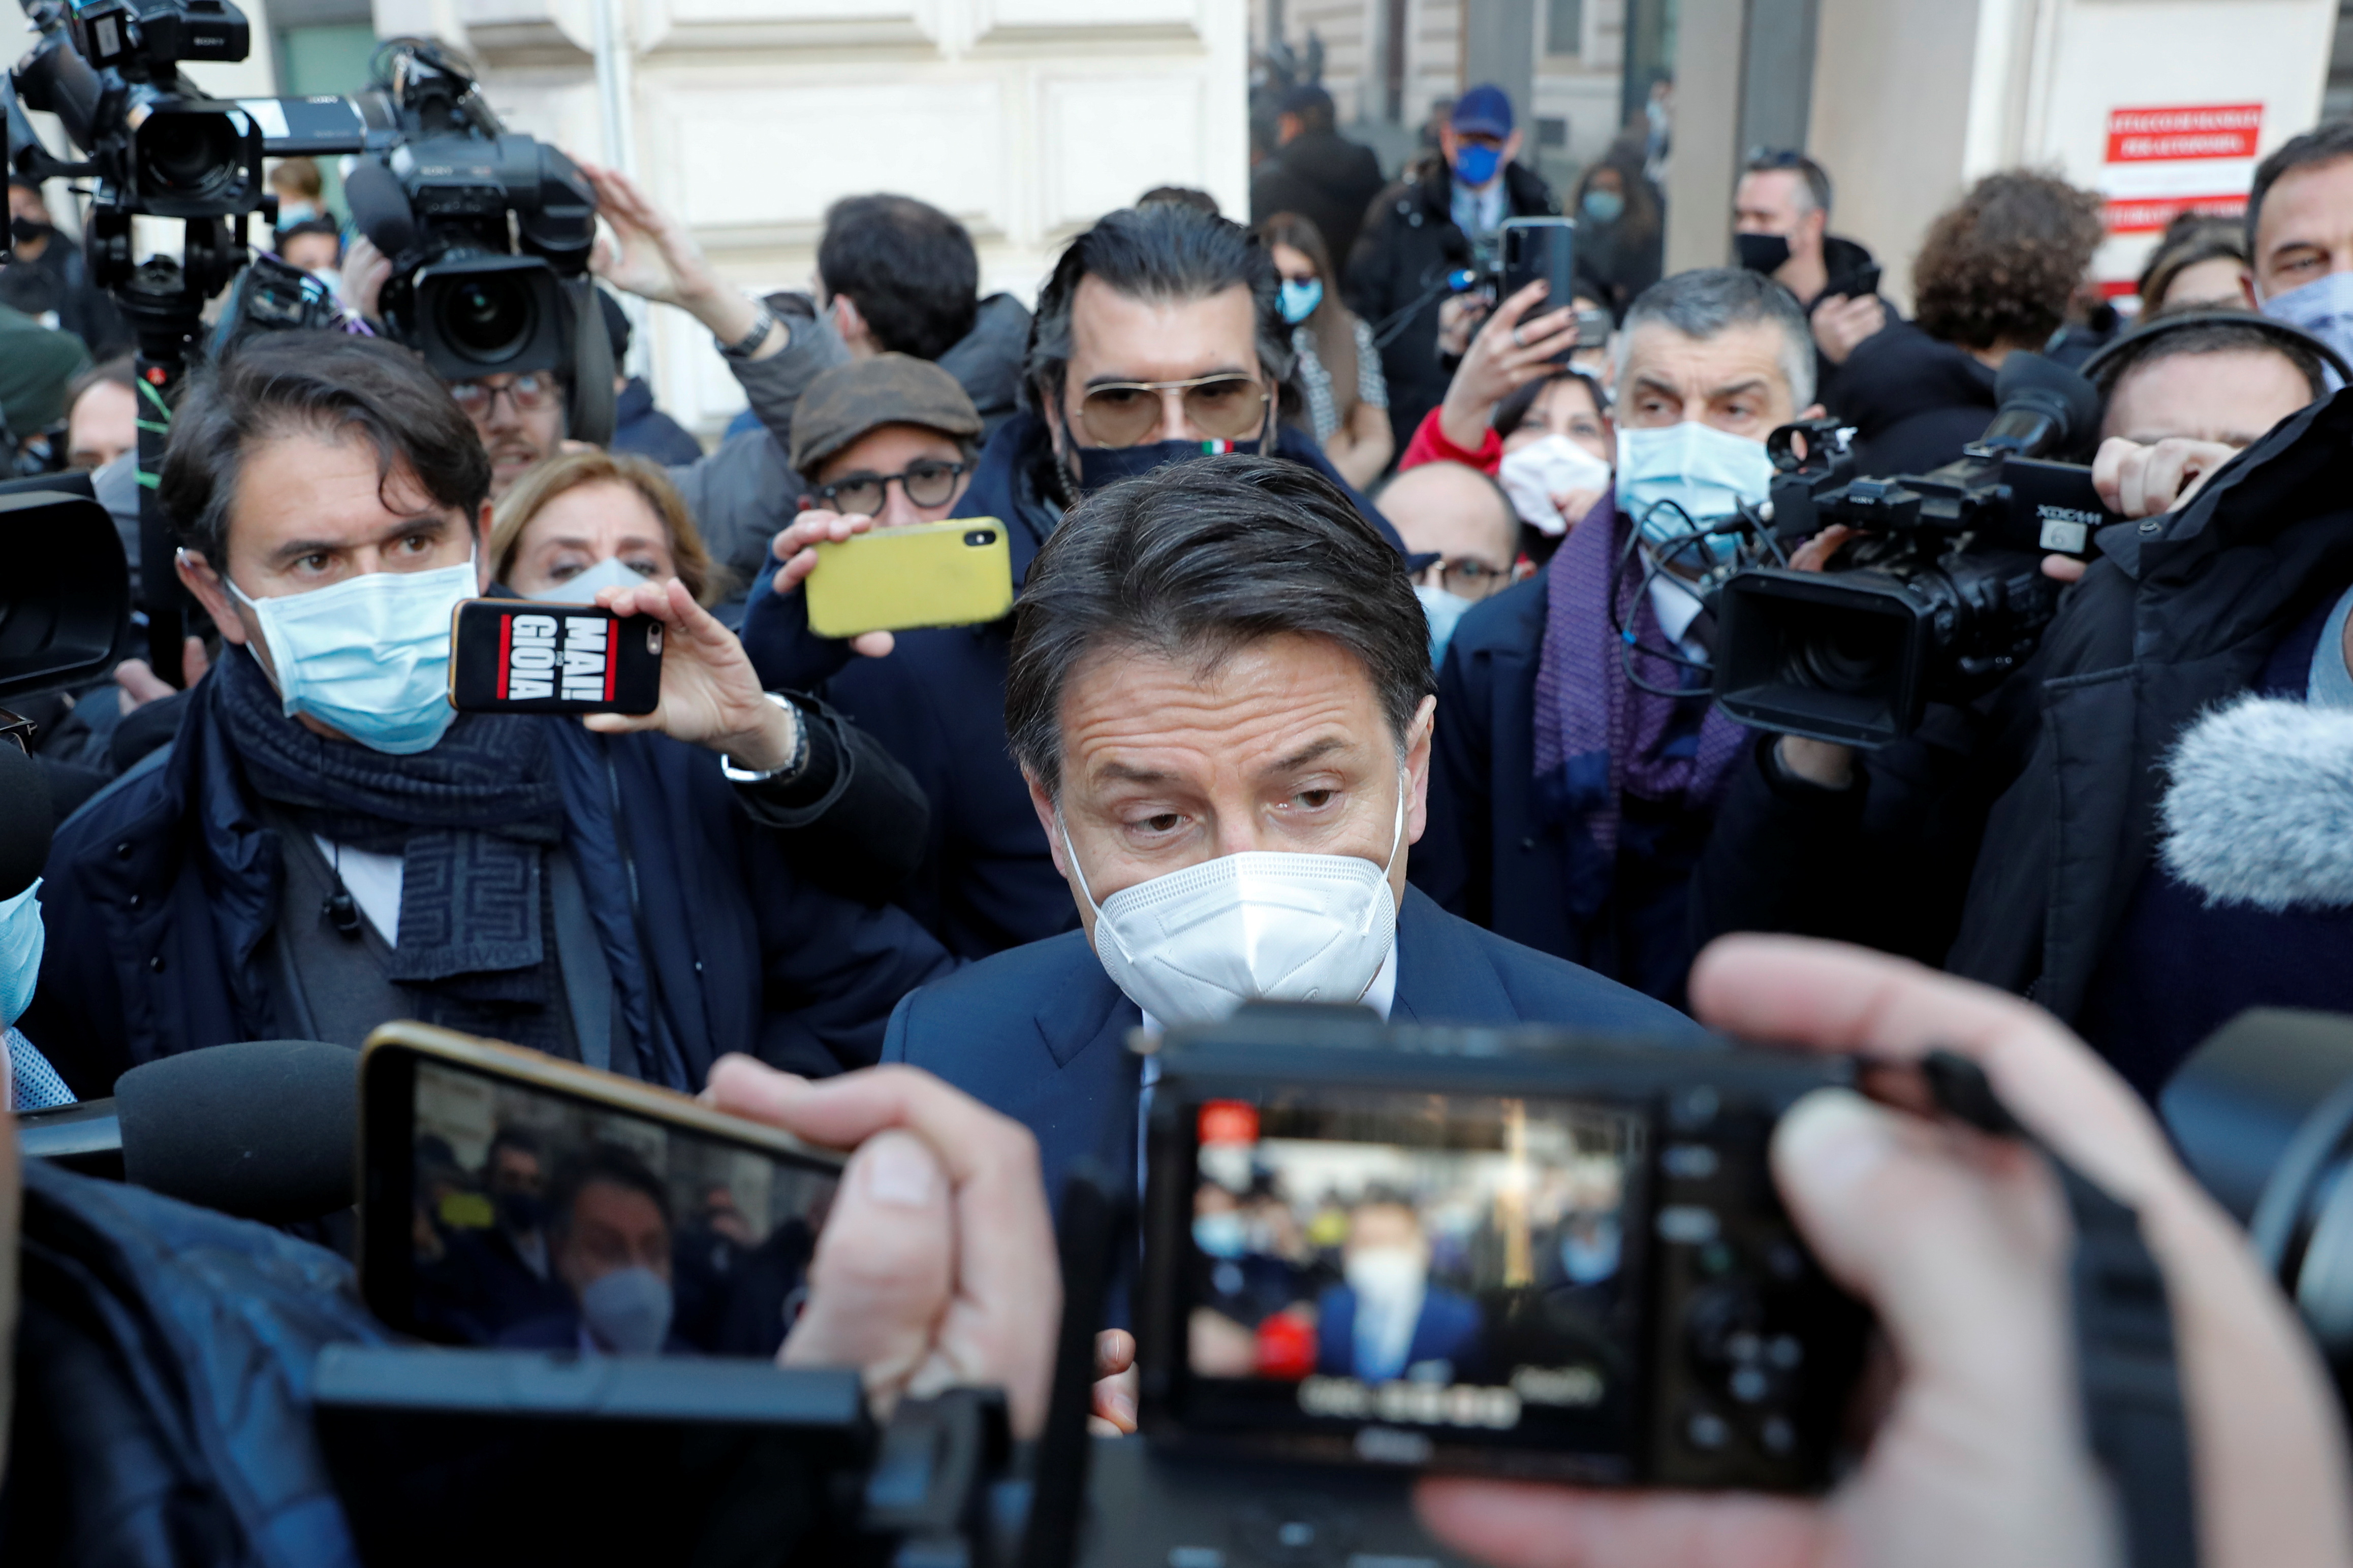 Italian Prime Minister Giuseppe Conte speaks to the media outside his office, Chigi Palace, after meeting with President Sergio Mattarella, in Rome, Italy, January 13, 2021. REUTERS/Remo Casilli